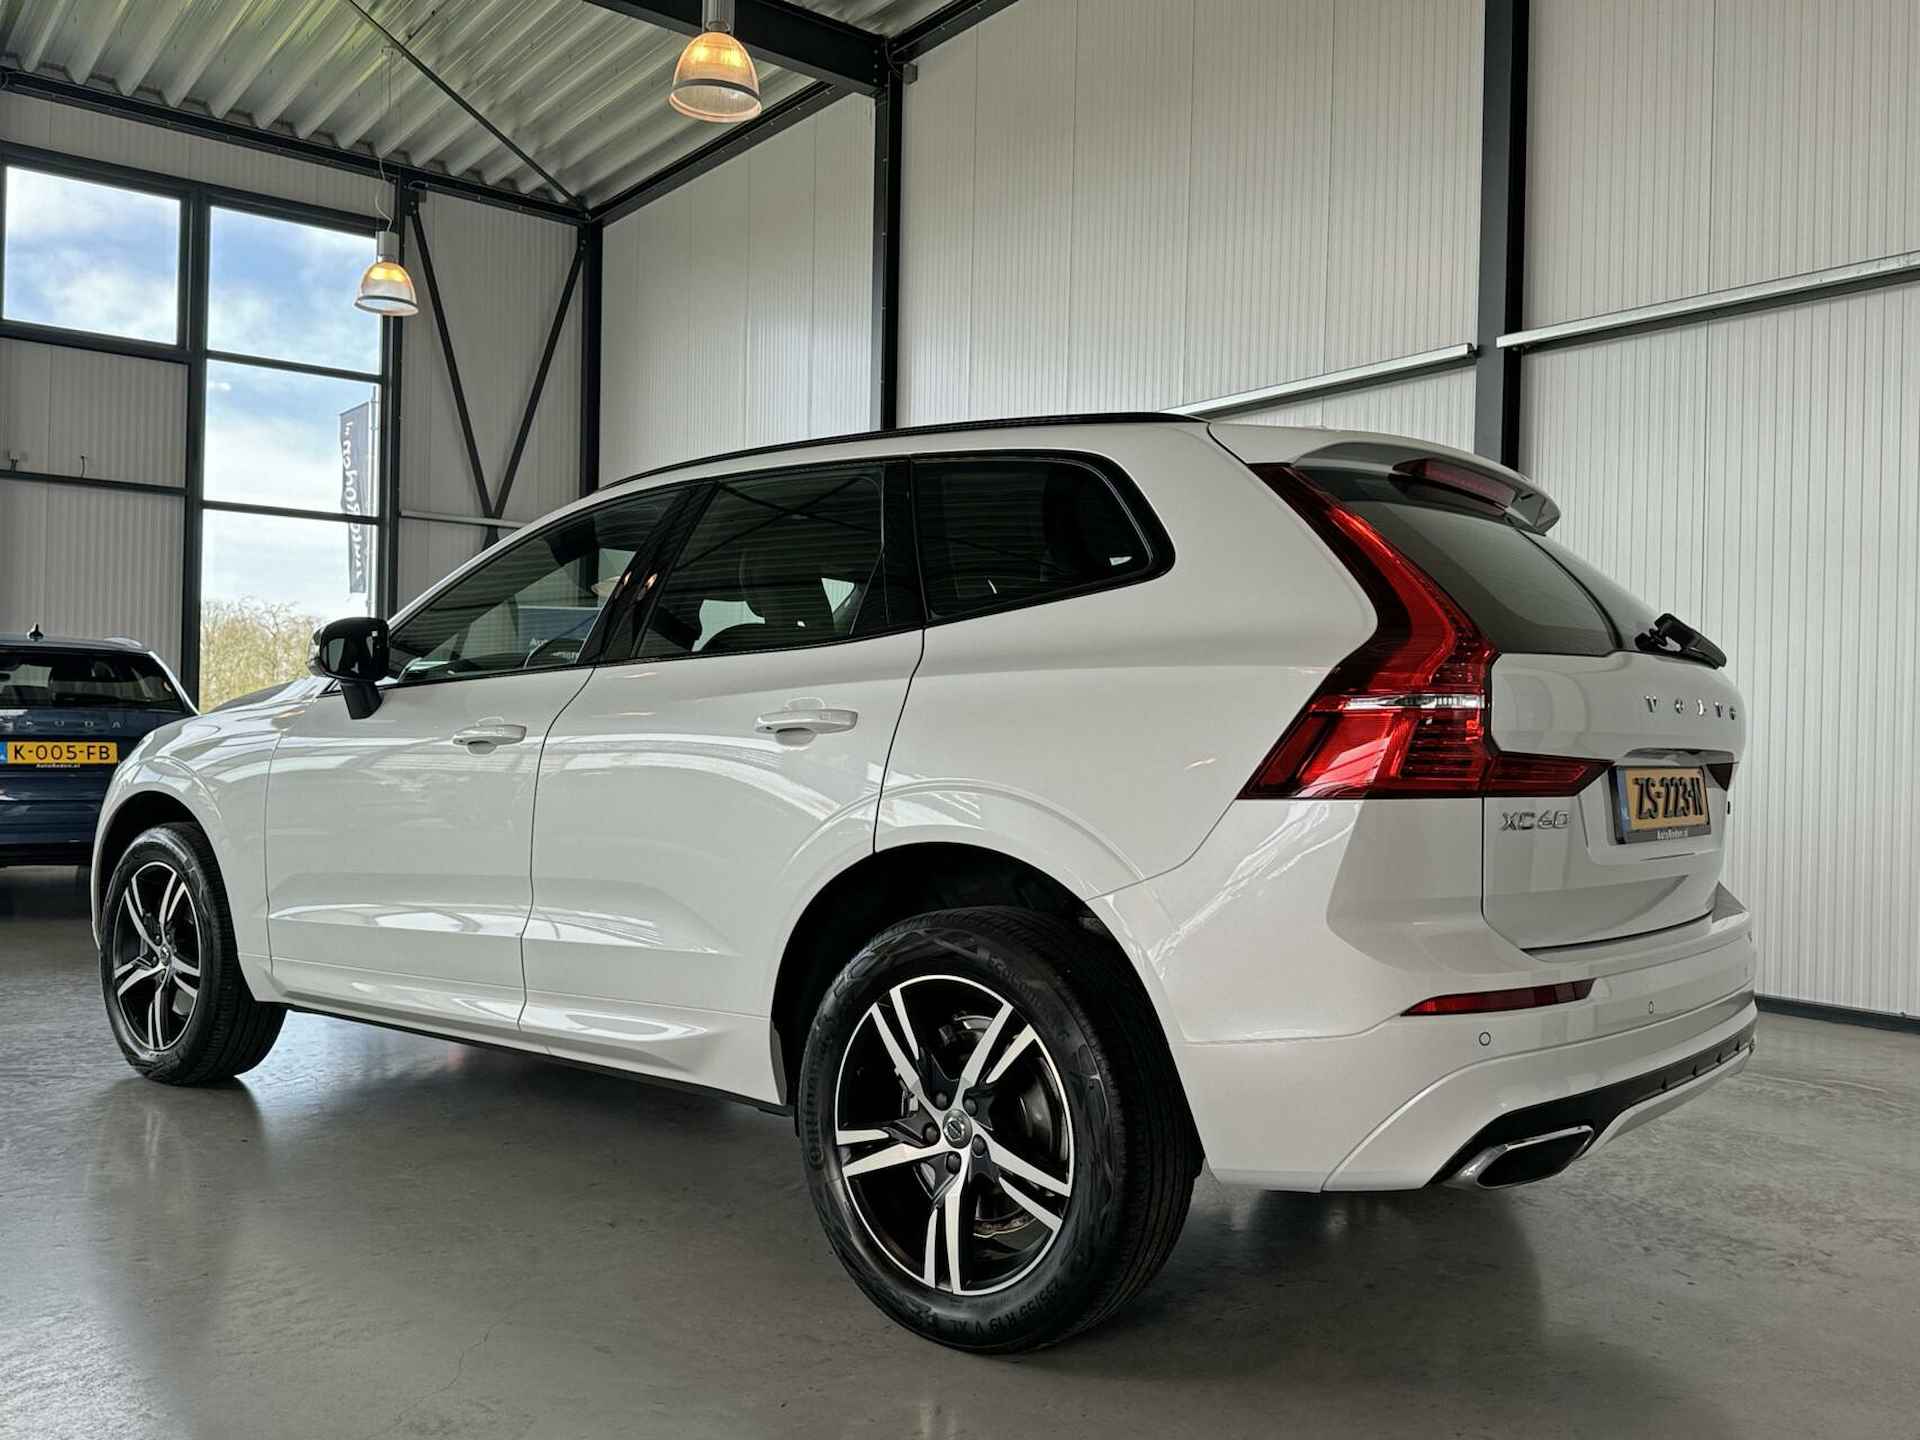 Volvo XC60 2.0 T5 184Kw AWD R-Design Geartronic Inscription Plus|Luchtvering - 4/44